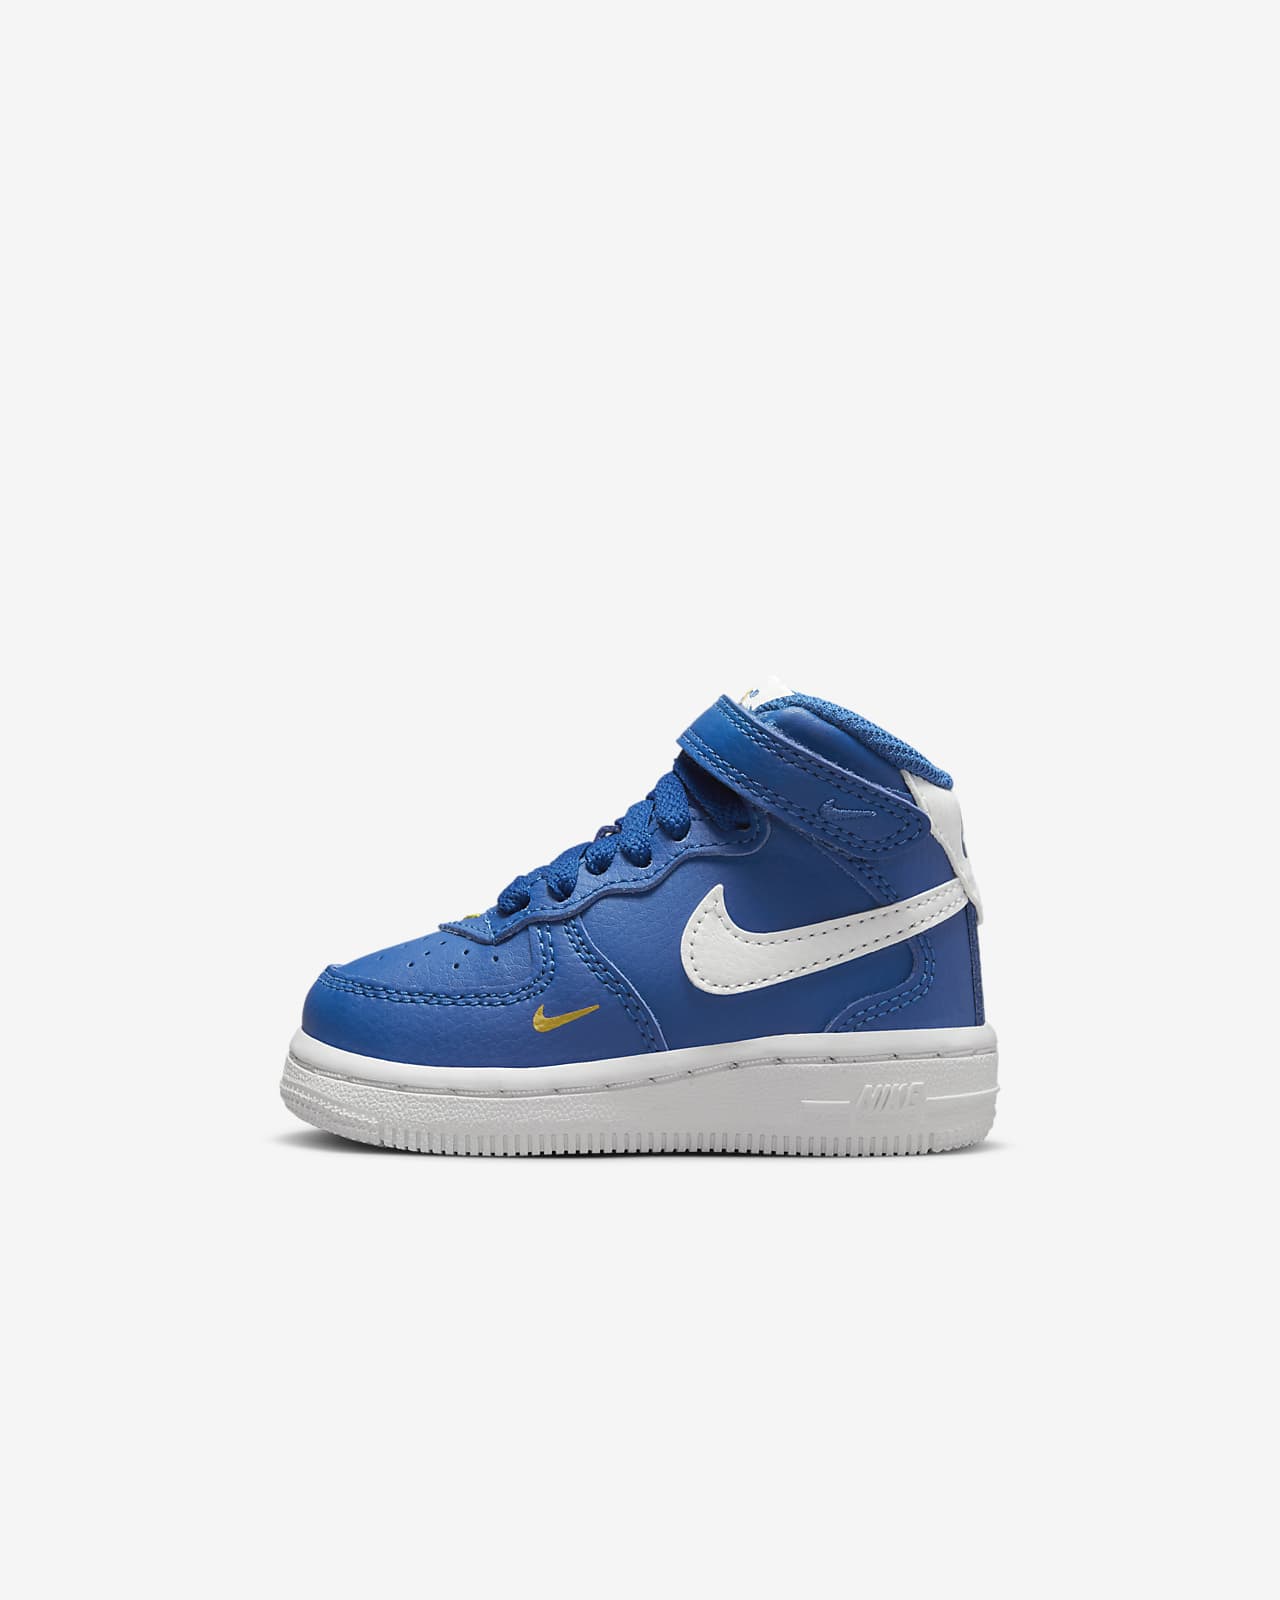 Communisme mode Tot ziens Nike Force 1 Mid SE 40th Baby/Toddler Shoes. Nike.com